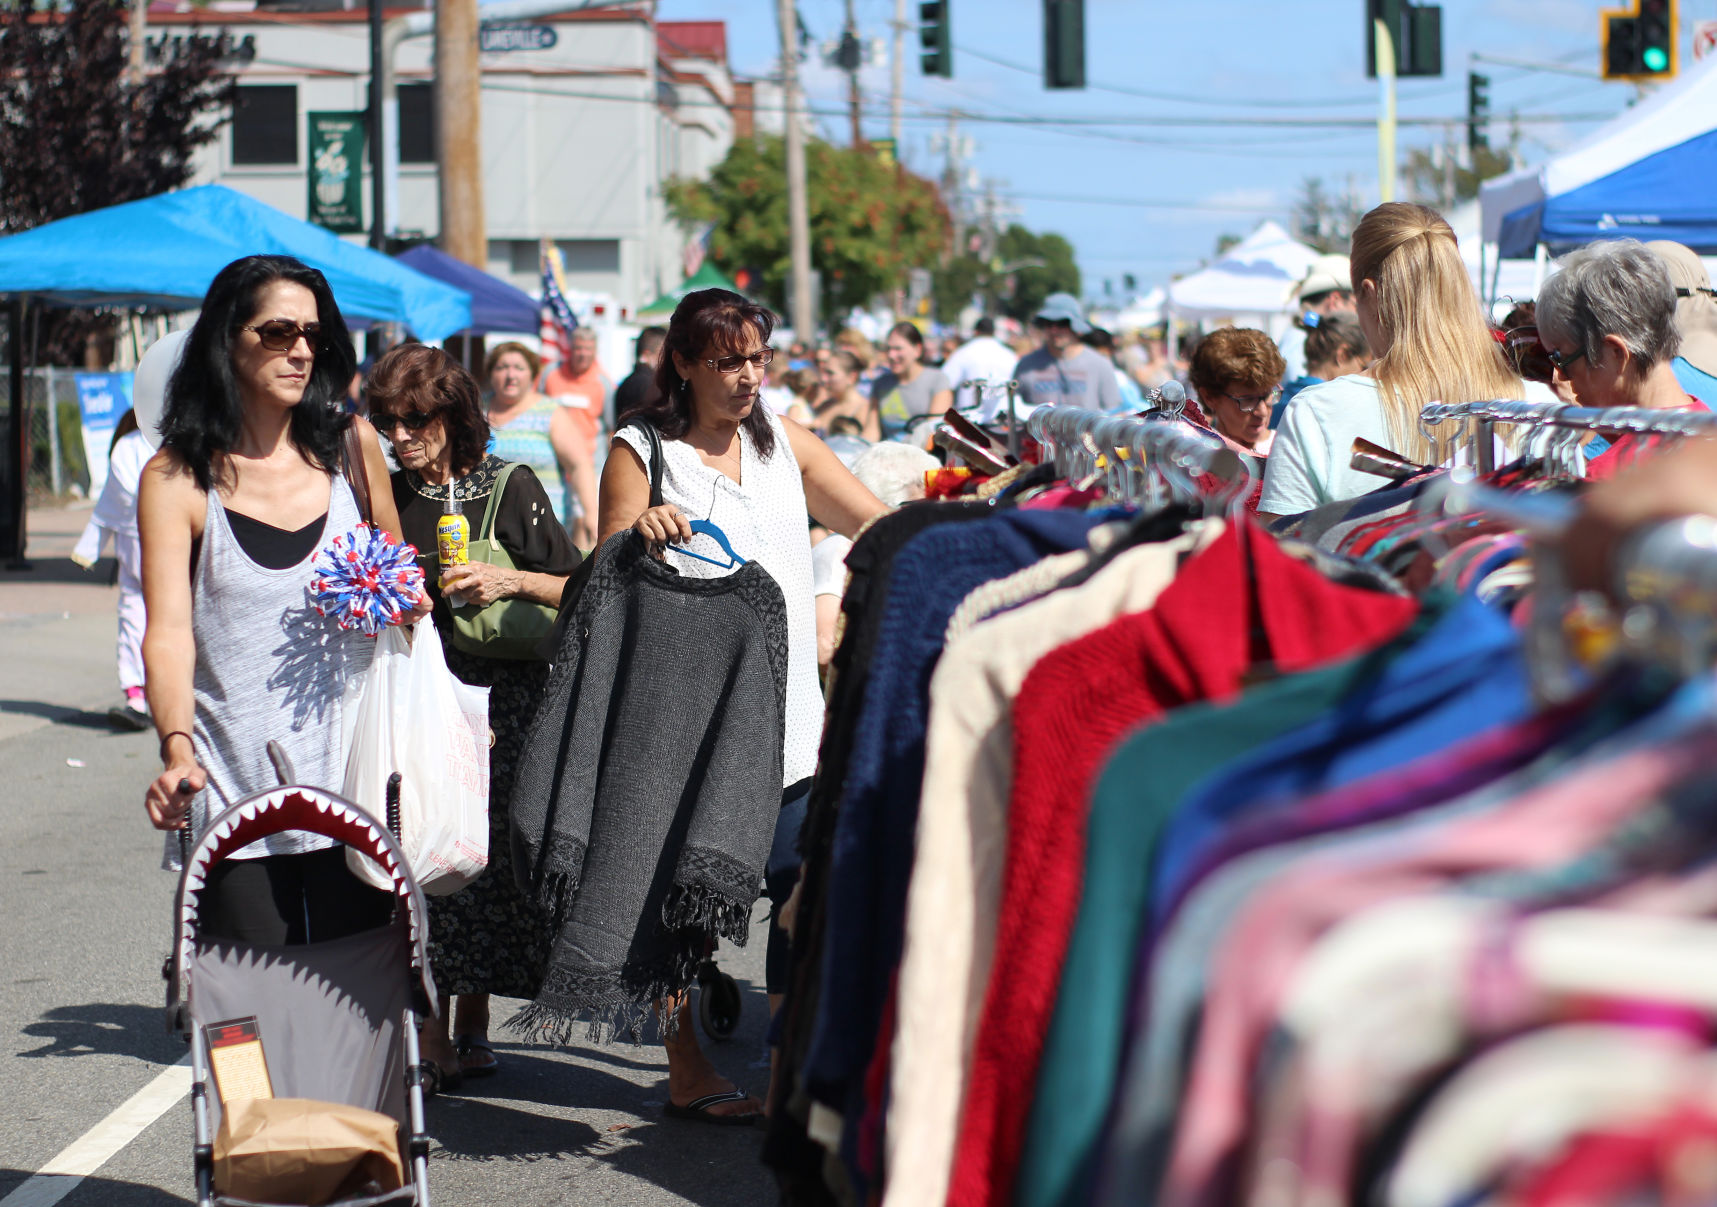 

<p></noscript>The sun was high and the day was warm as New Hyde Park residents and businesses gathered for the community’s 21st annual street fair.</p>
<p>” /></p>
<div><span style=